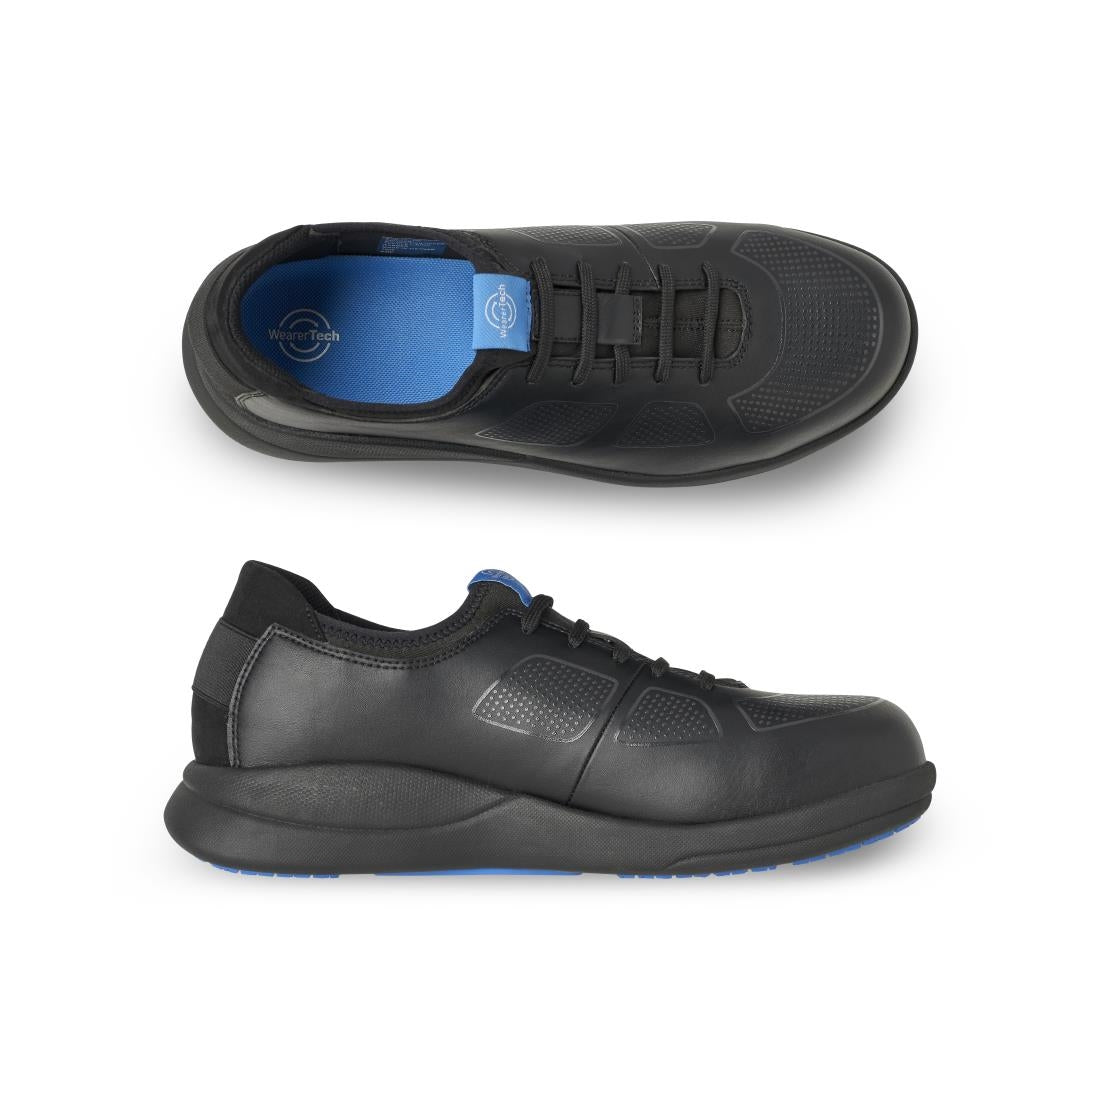 BB745-44 WearerTech Transform Safety Toe Trainer Black with Modular Insole Size 44